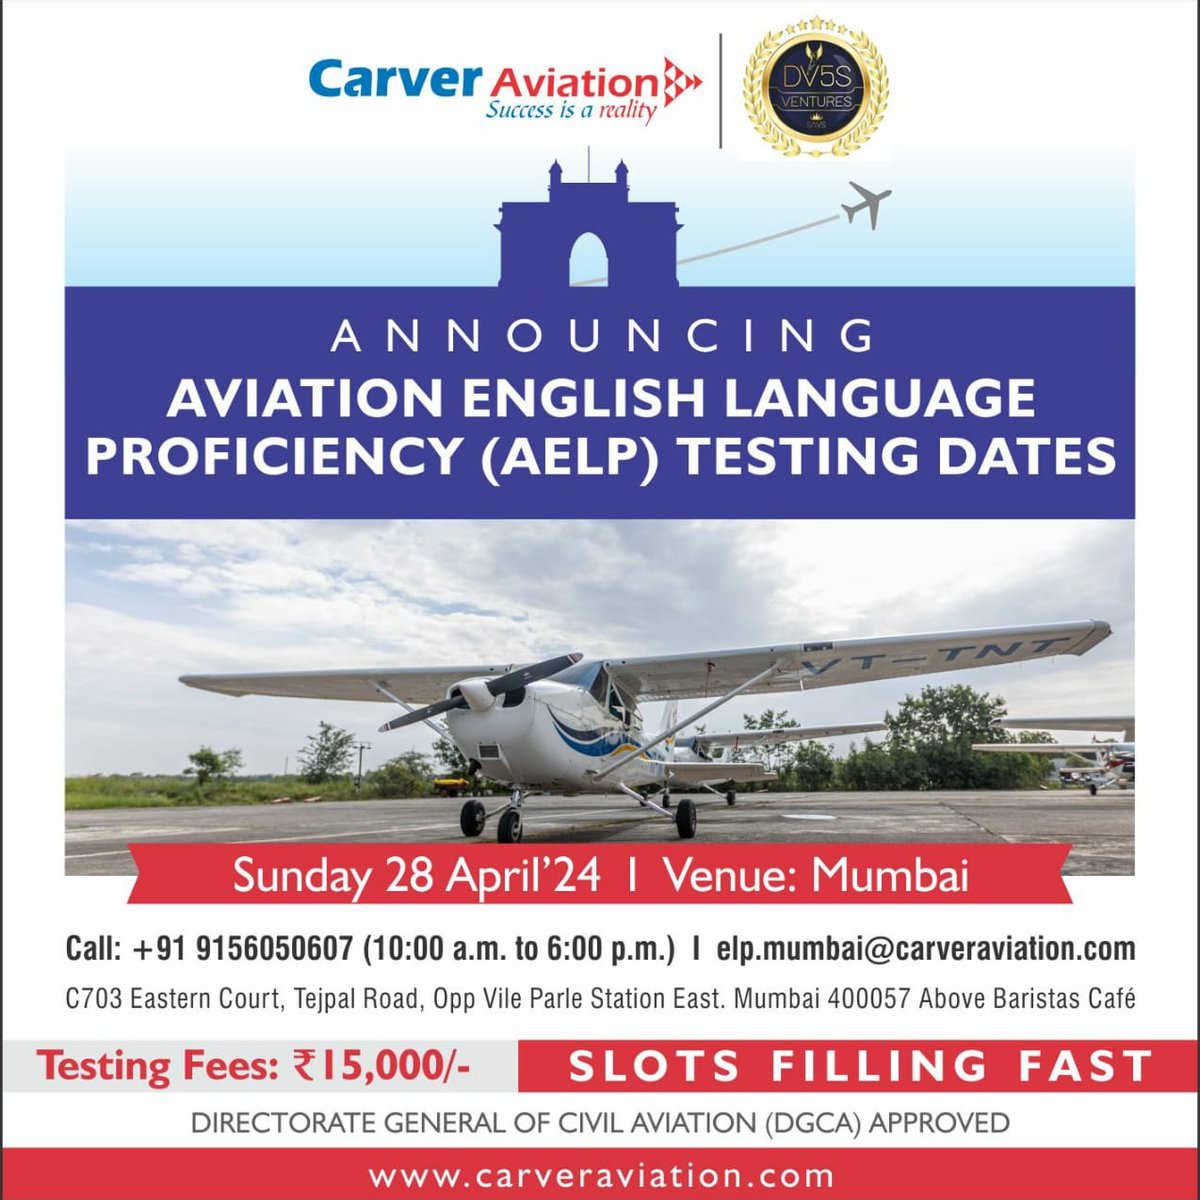 Slots filling up quickly - book your seat TODAY.

For more details, call now on : 9175060708

#AELPtesting #aelp #CarverAviation #baramatiairport  #registernow